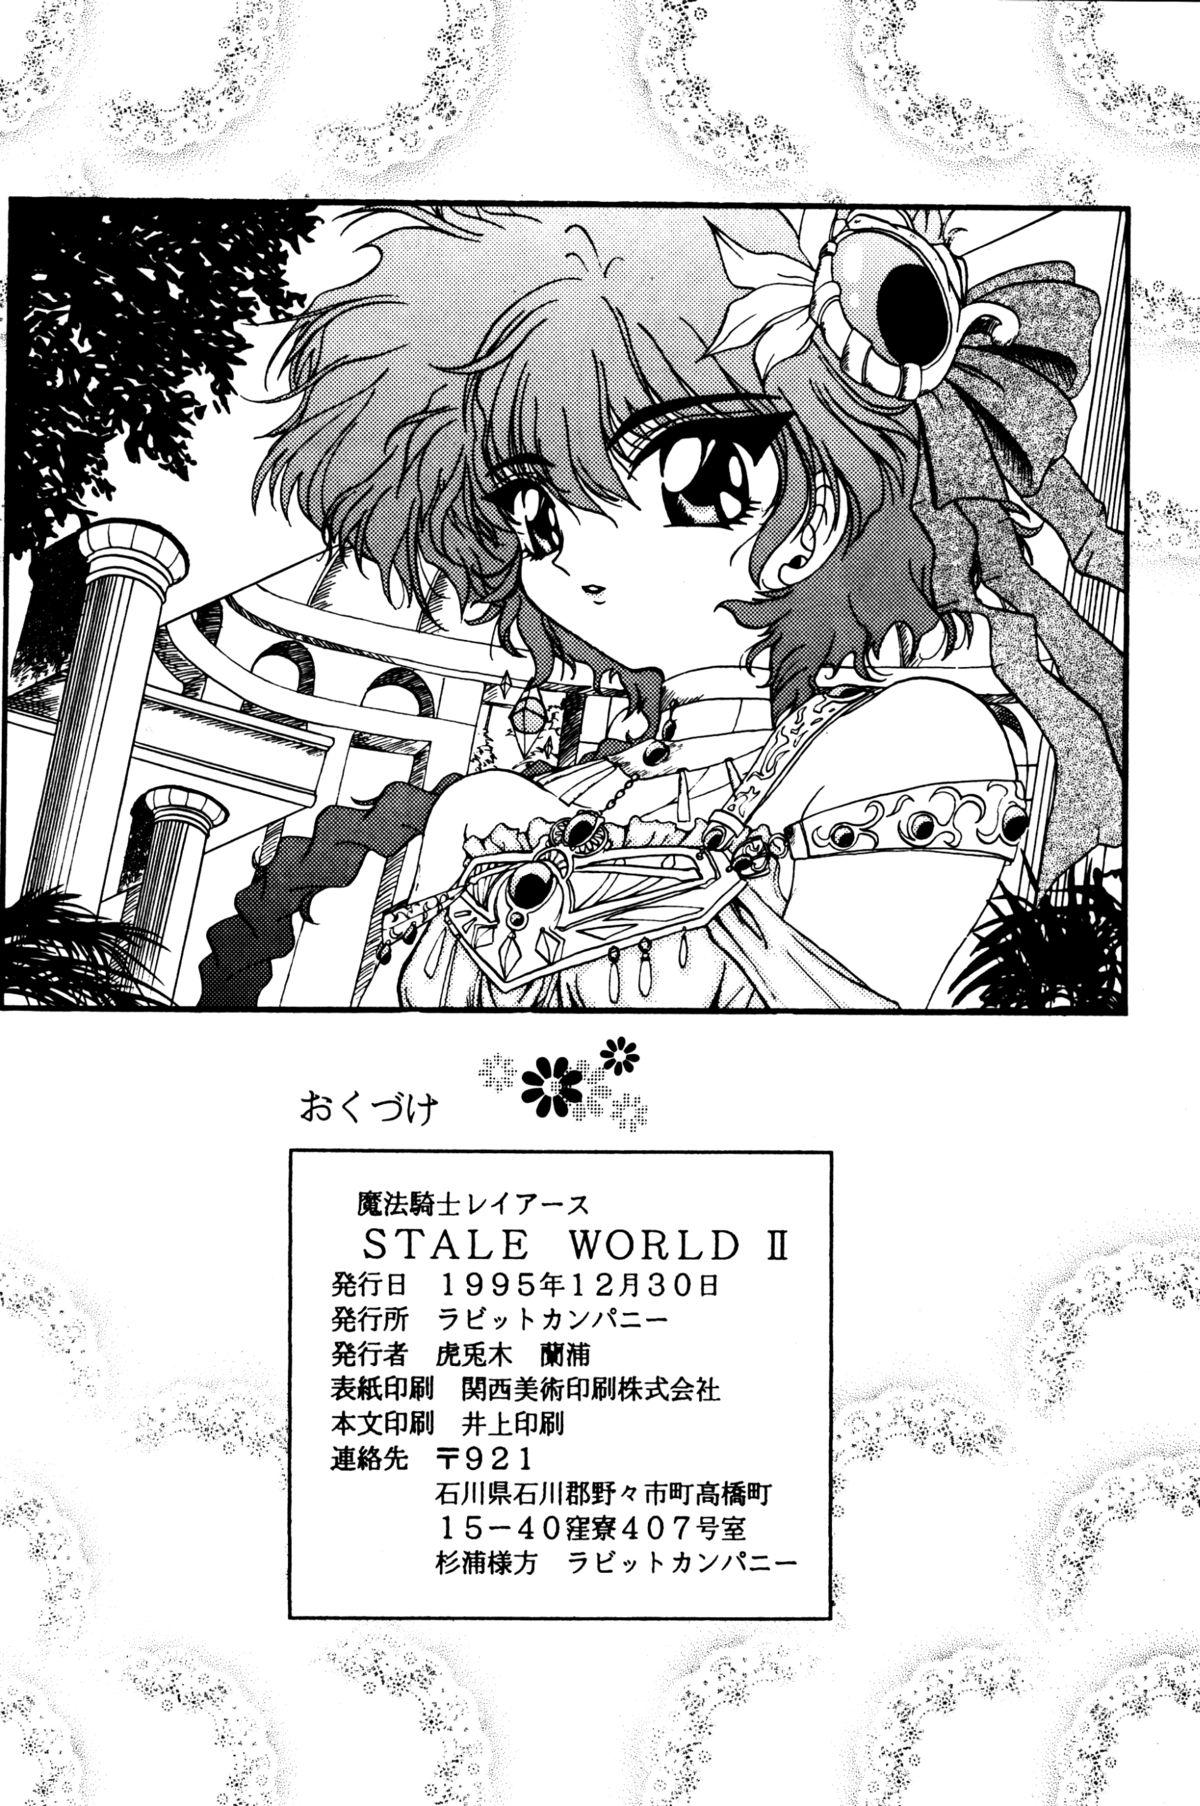 Petite Girl Porn Stale World II - Magic knight rayearth Ejaculation - Page 29